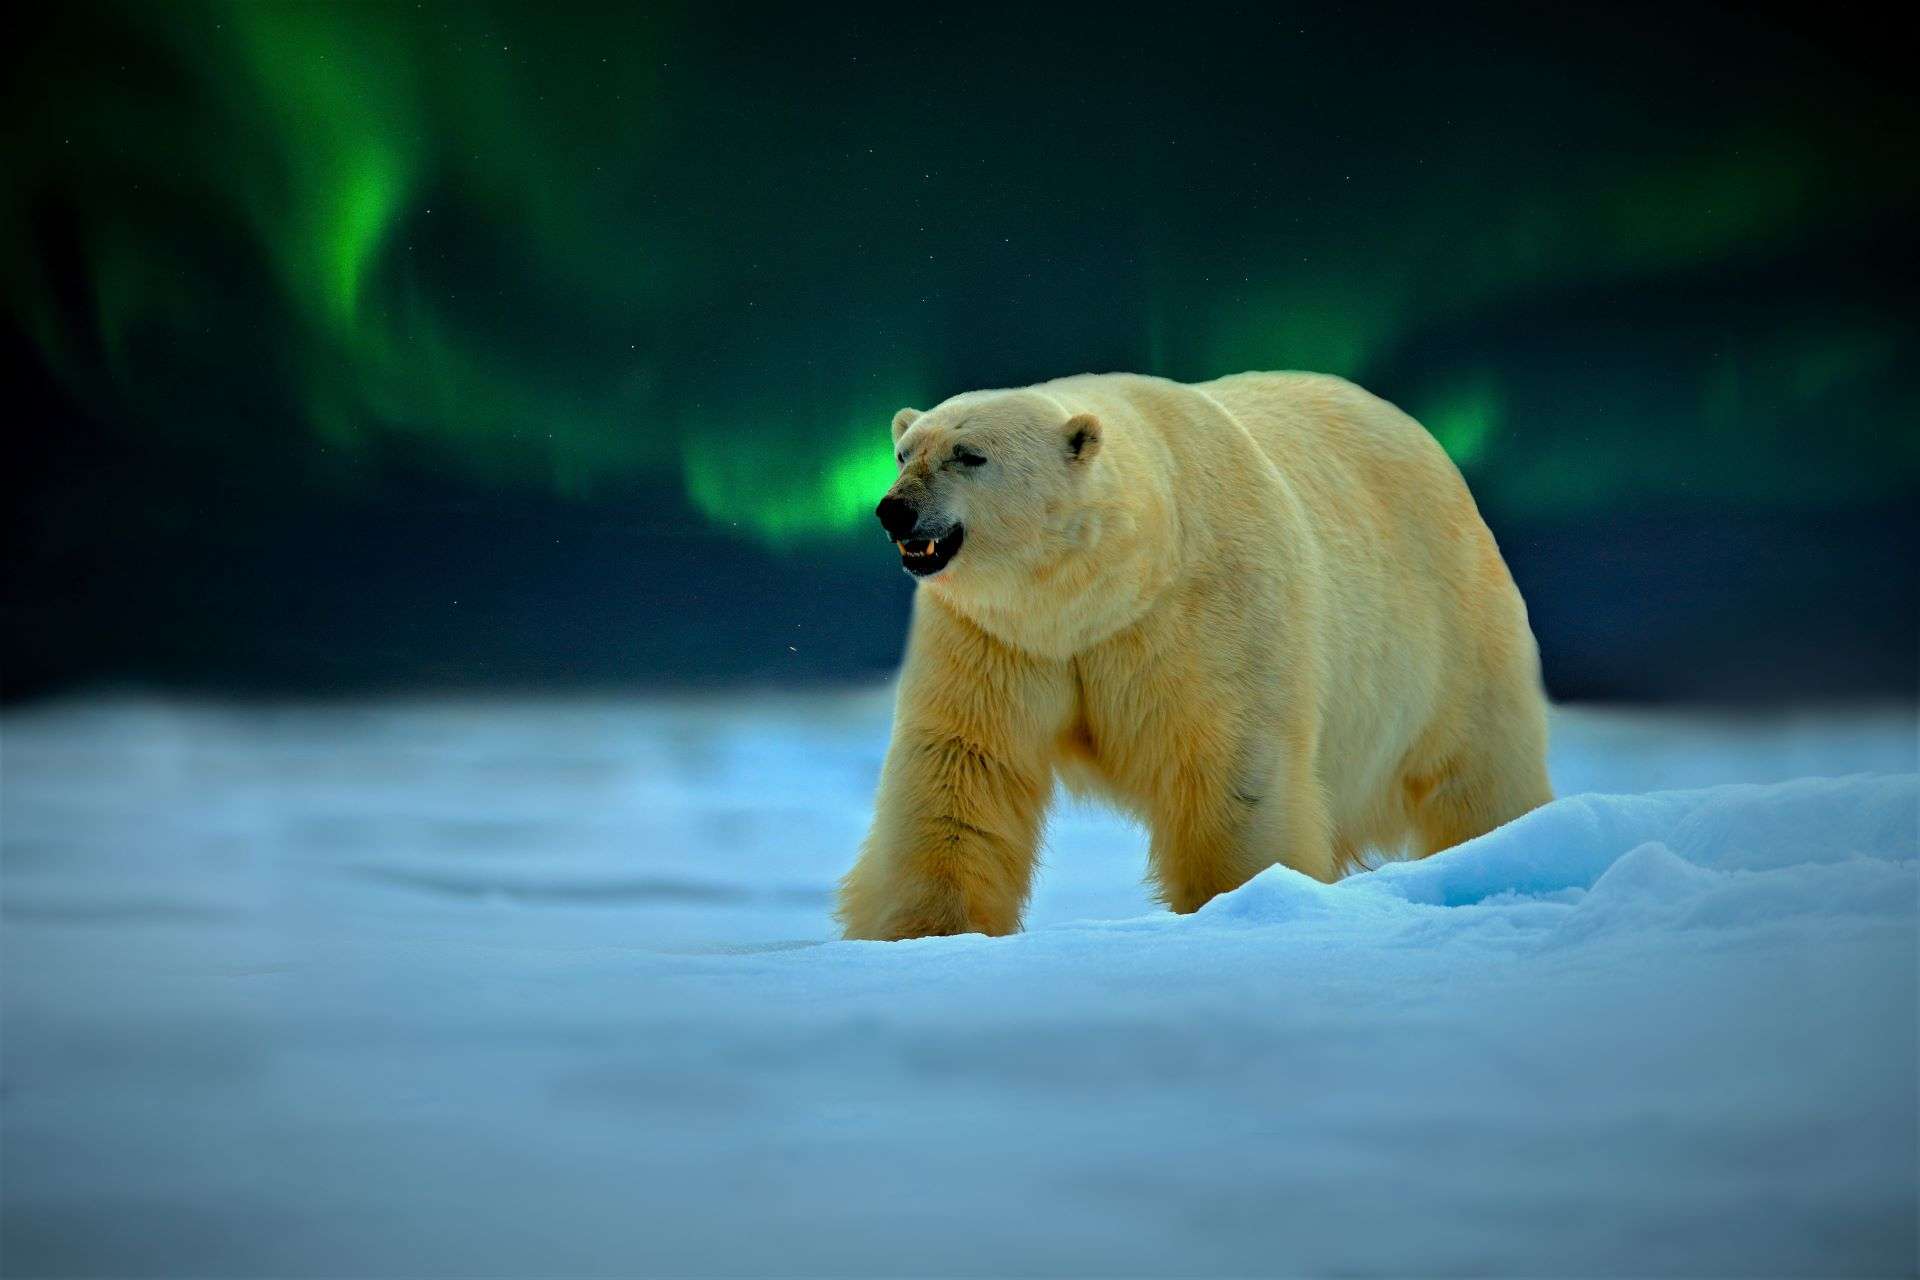 A polar bear walking in the snow with a green aurora of northern lights in the sky.